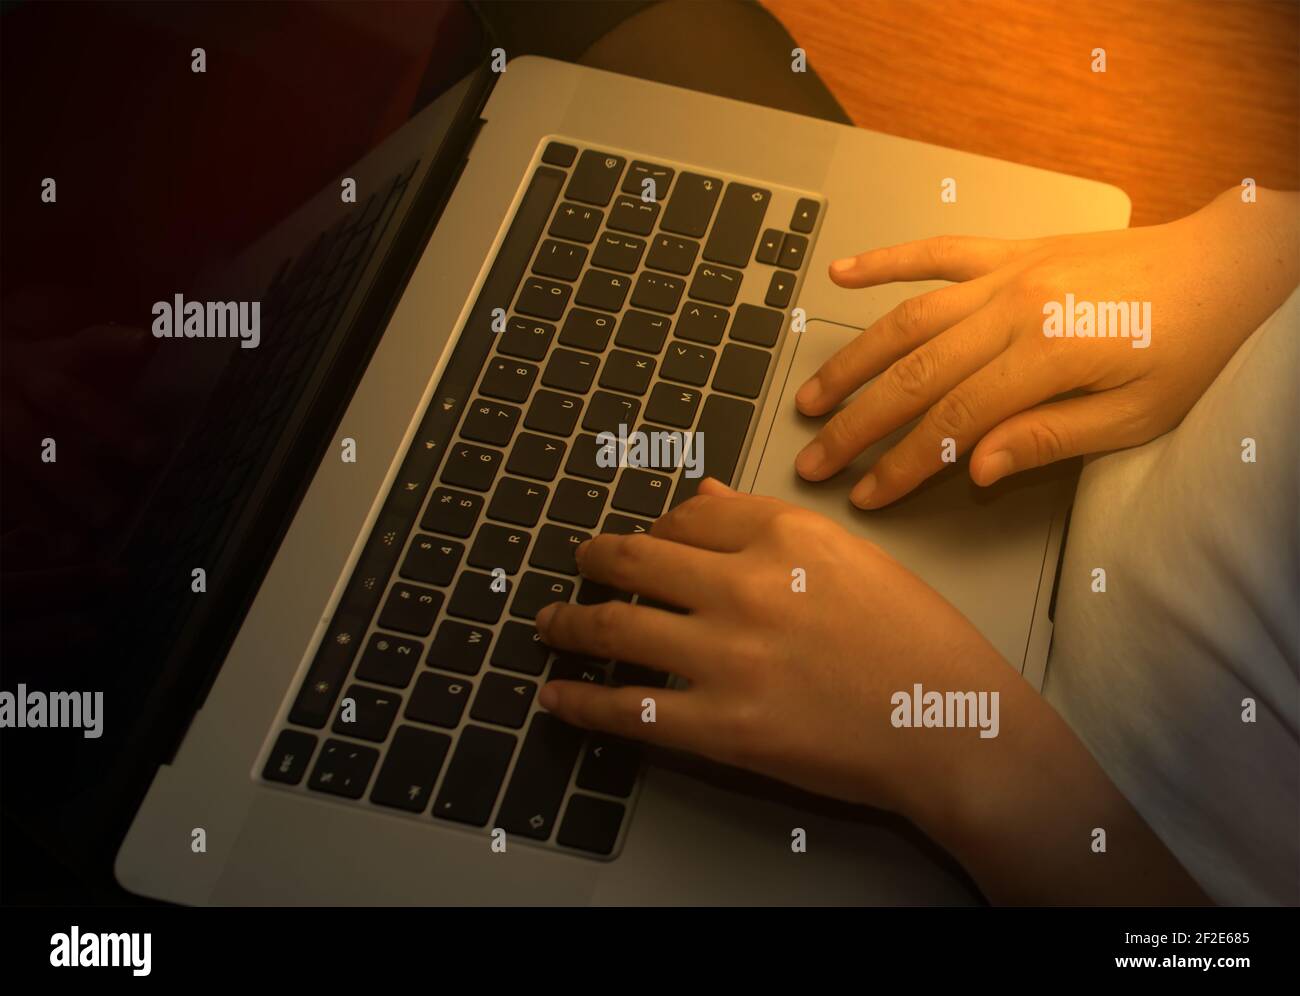 Girl hand typing laptop keyboard in concept coffee shop Wireless data entry and technology. Stock Photo